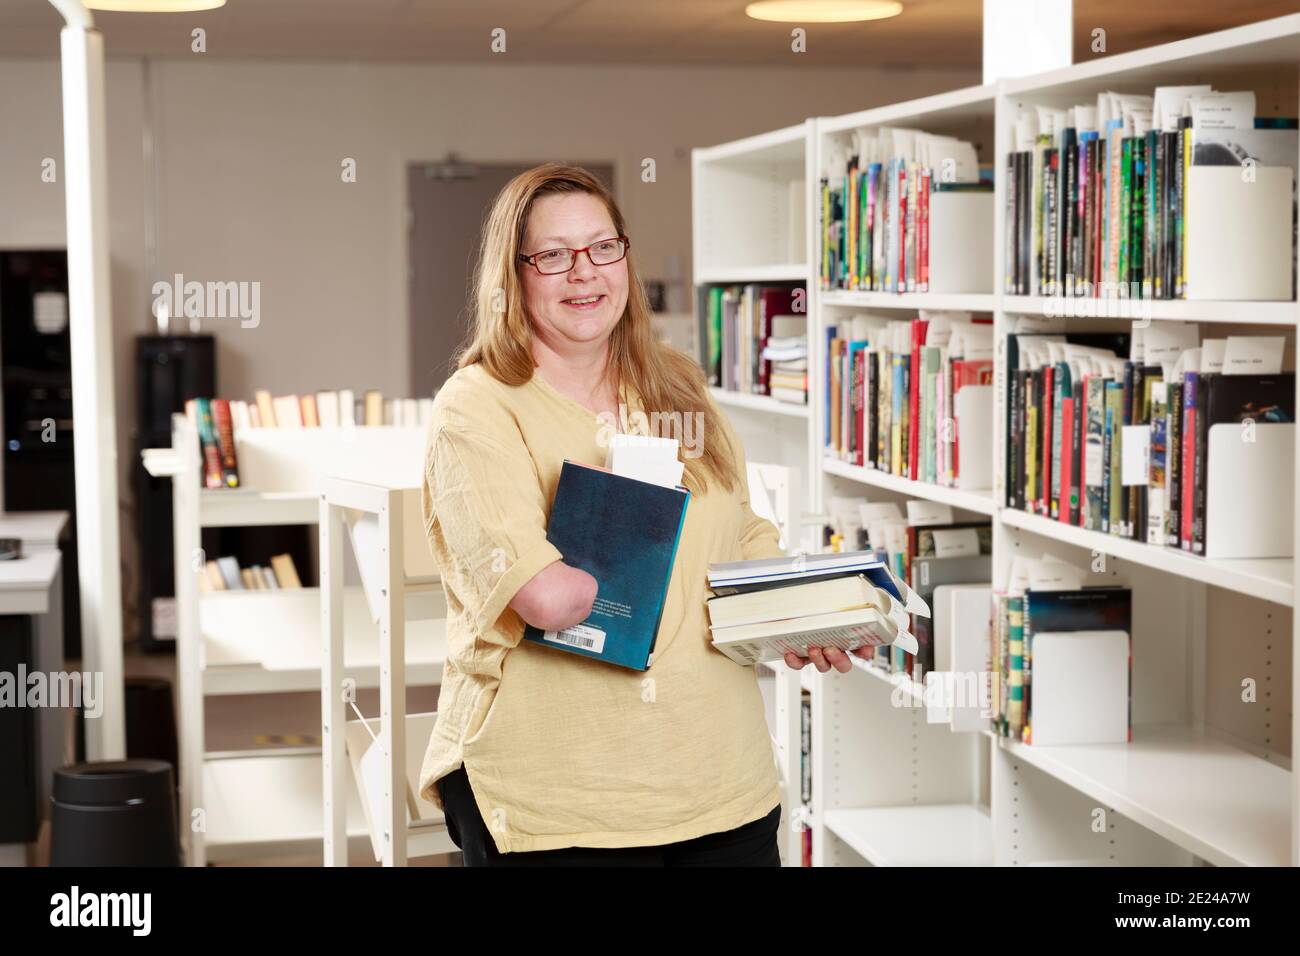 Portrait of librarian holding a book Stock Photo